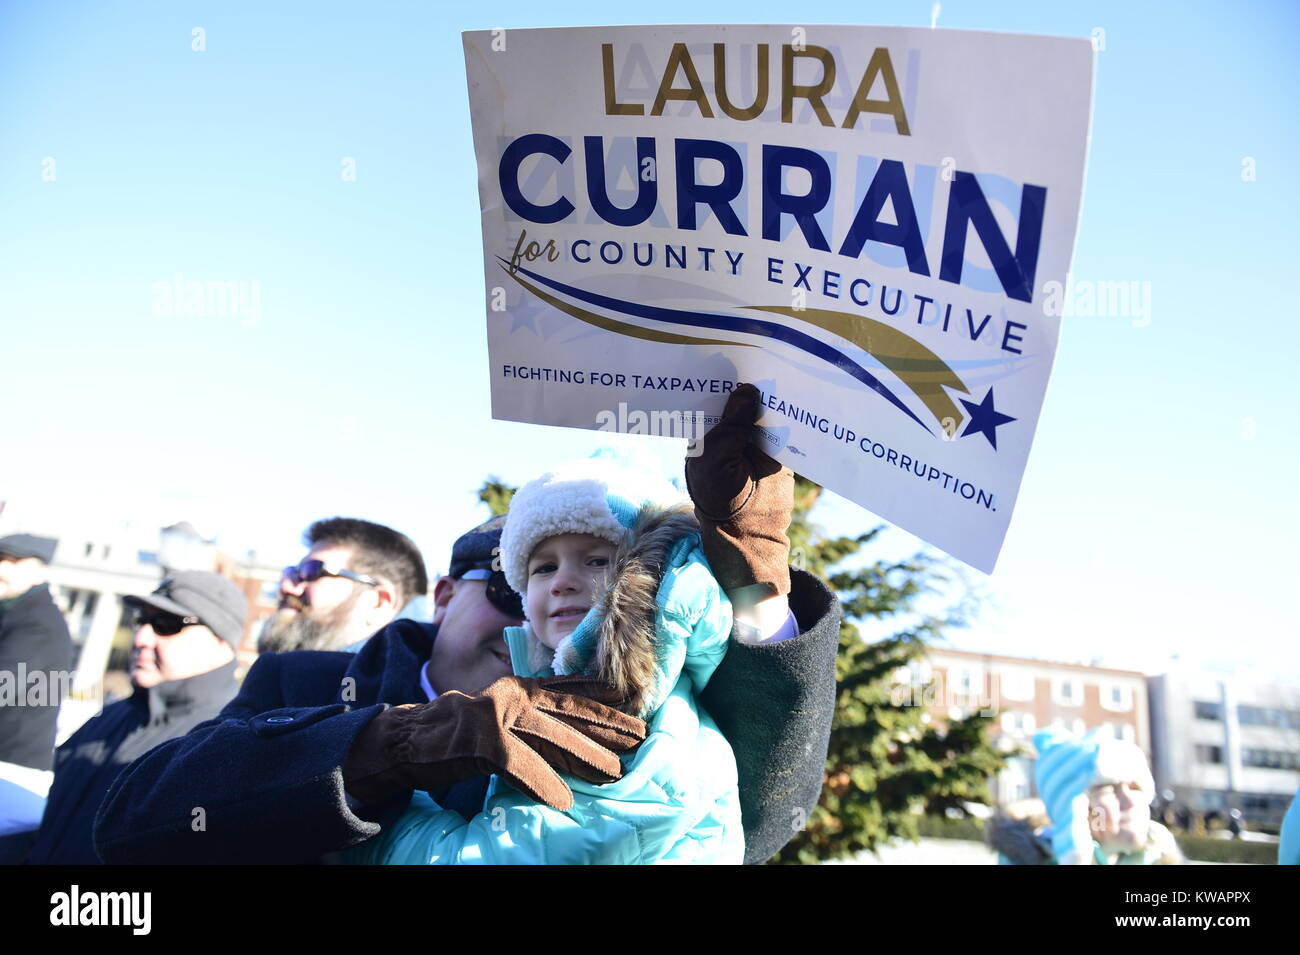 Mineola, New York, USA. January 1, 2018. JOE CAVANAUGH, of Oceanside, is holding his young daughter EMMA CAVANAGH and a political poster 'Laura Curran for County Executive' while standing bundled up in warm winter coats in audience during historic swearing-In of Laura Curren as Nassau County Executive, the first female County Executive, held outdoors. Temperature was a freezing 14 ℉ Fahrenheit / -10 ℃  Celsius for the outdoor ceremony held in front of Theodore Roosevelt Executive & Legislative Building. Stock Photo